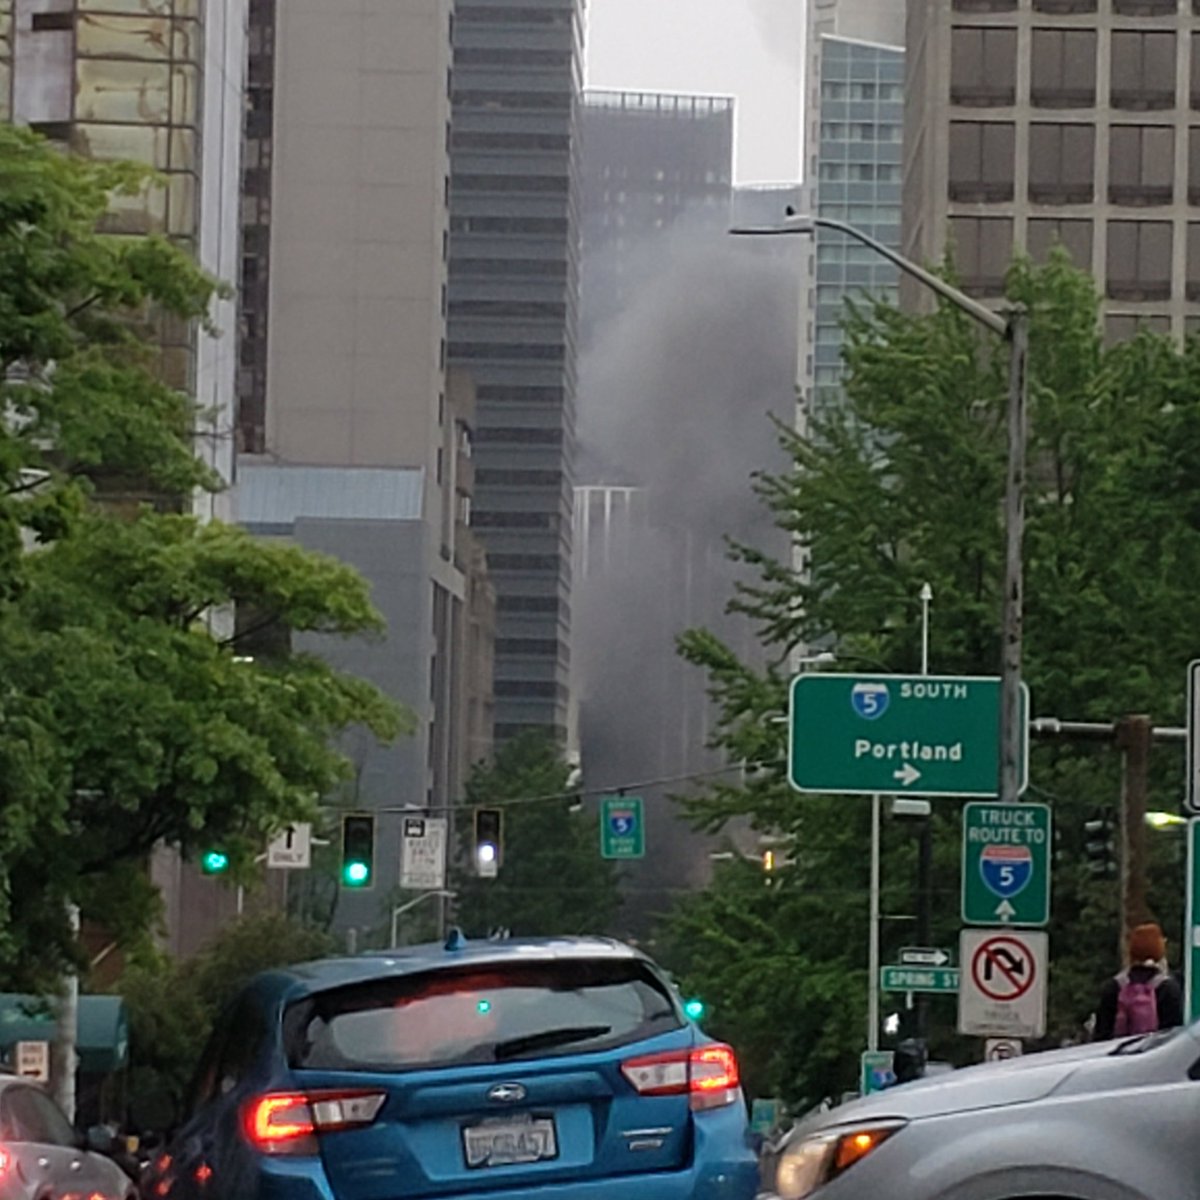 Just south of me: large cloud of tear gas. To the north downtown: black smoke from a reported car fire.  #seattleprotest  #GeorgeFloydprotest 1